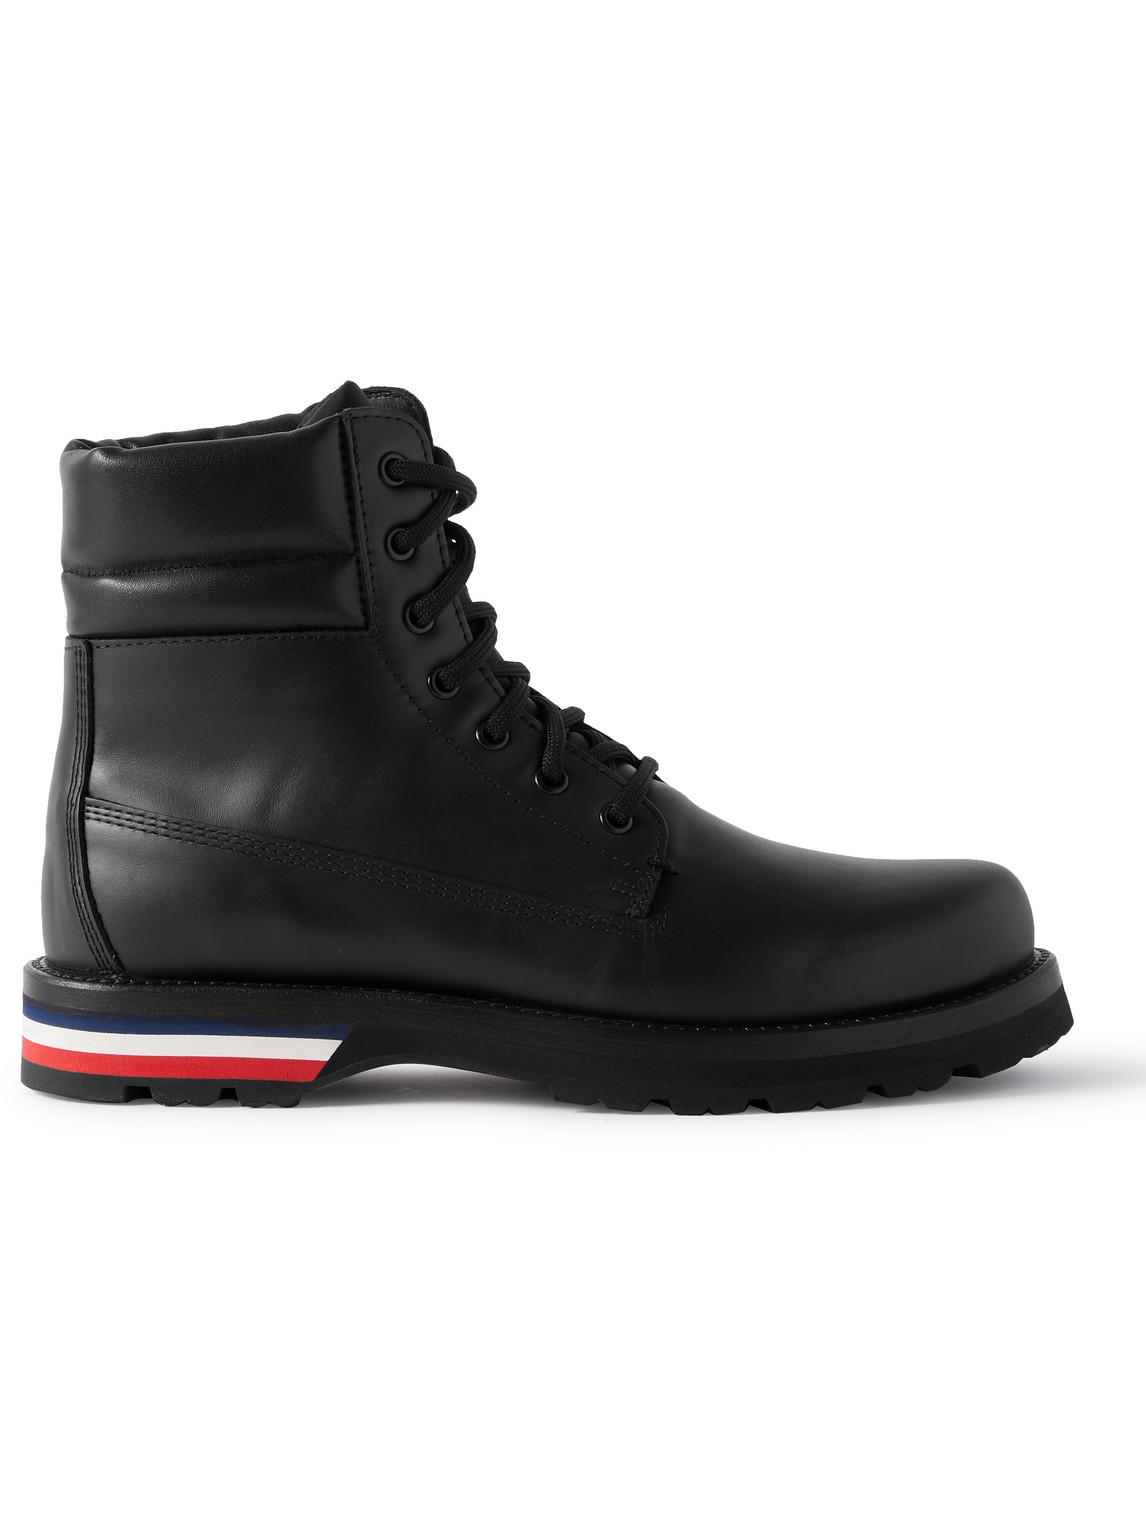 Moncler Vancouver Striped Leather Hiking Boots In Black